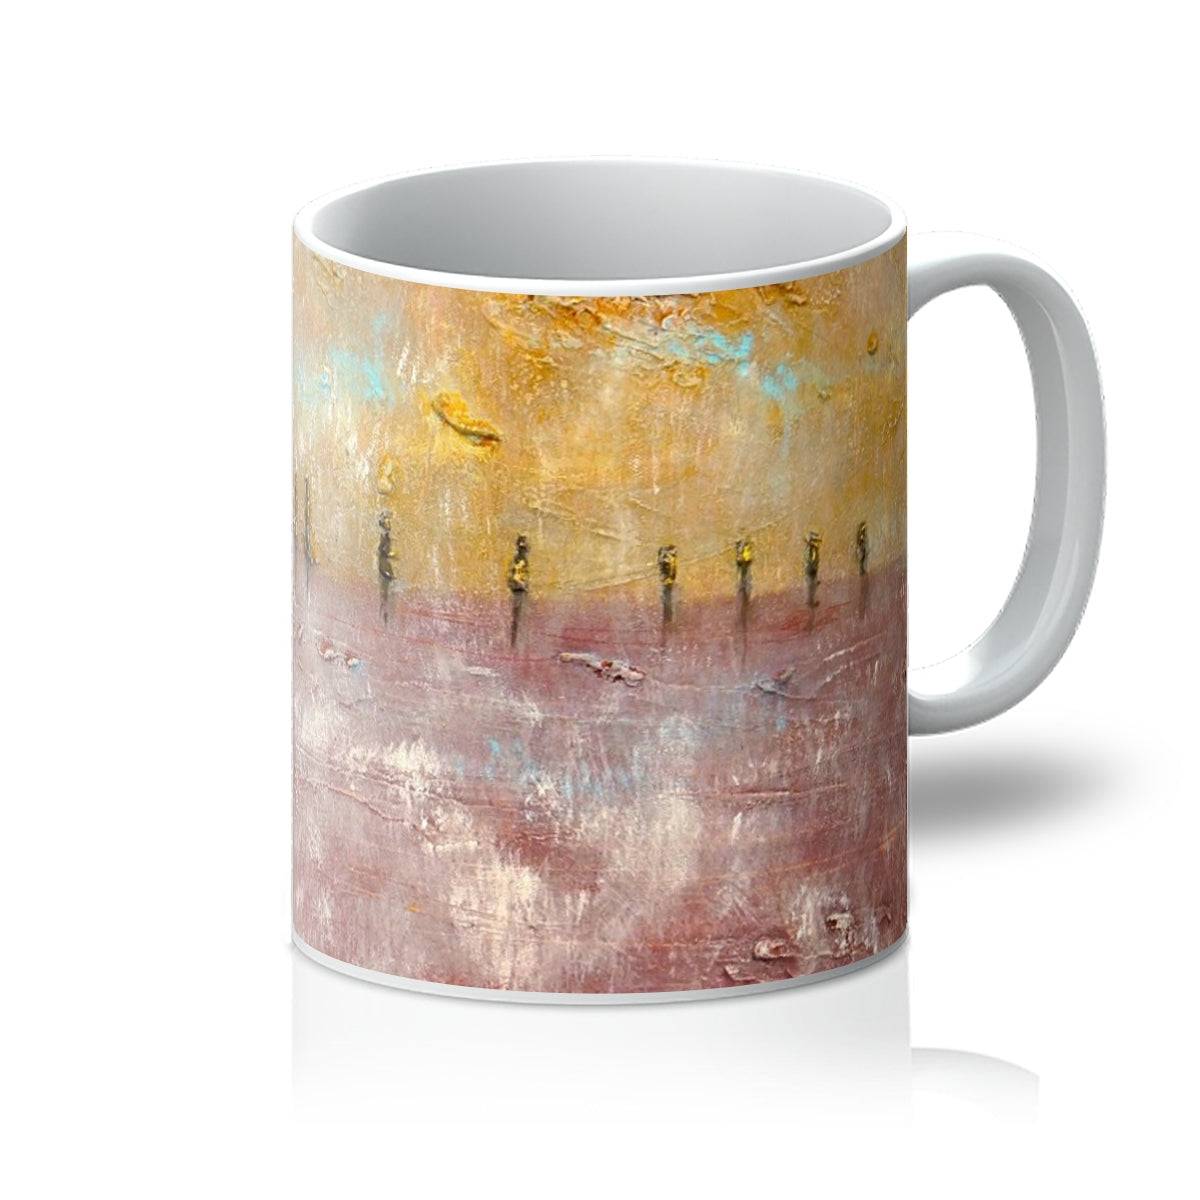 Brodgar Mist Orkney Art Gifts Mug-Mugs-Orkney Art Gallery-11oz-White-Paintings, Prints, Homeware, Art Gifts From Scotland By Scottish Artist Kevin Hunter